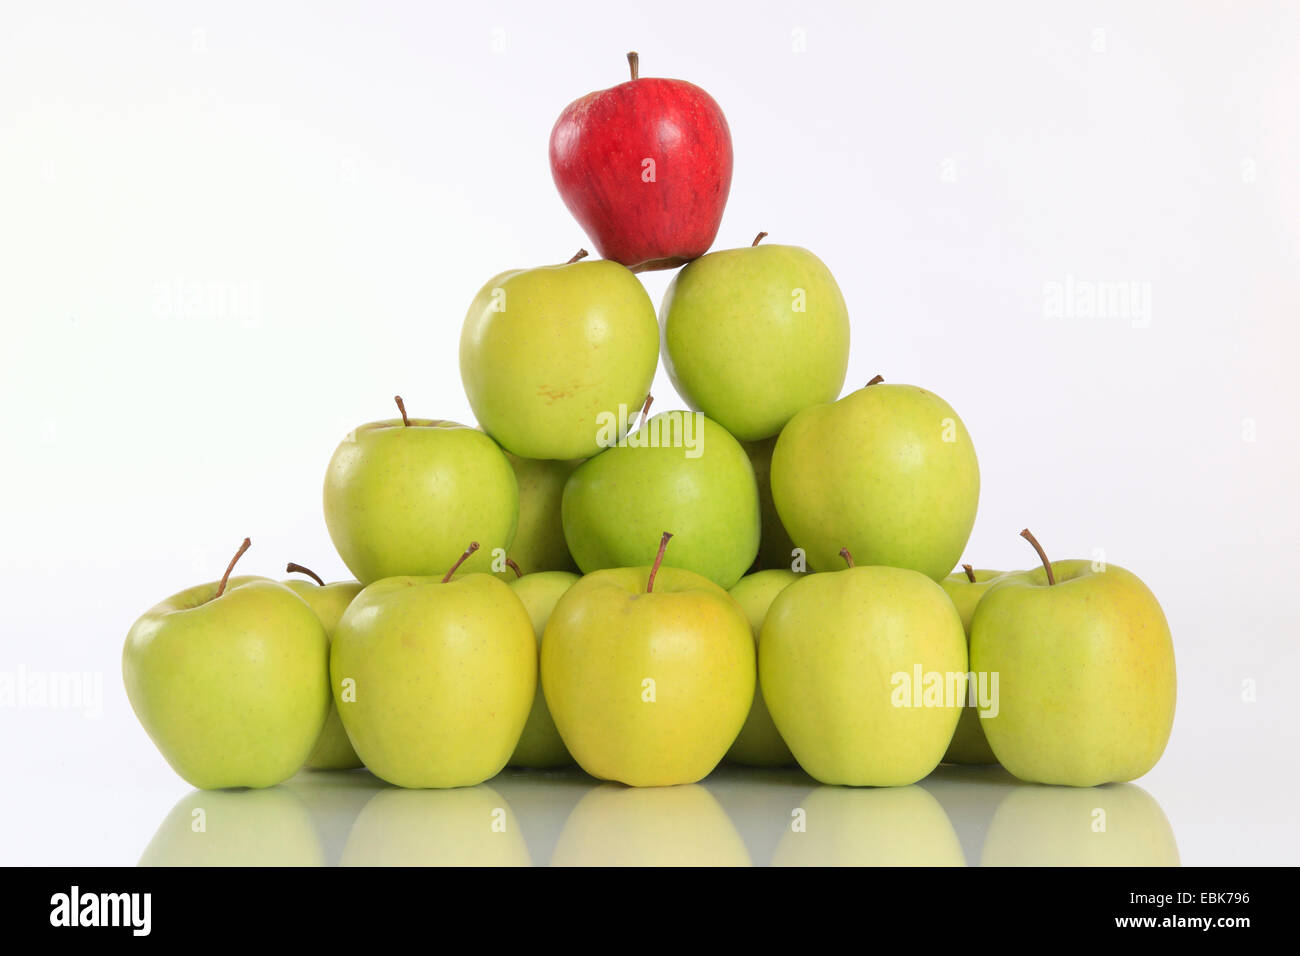 https://c8.alamy.com/comp/EBK796/apple-malus-domestica-pyramid-of-green-apples-at-the-top-a-red-one-EBK796.jpg